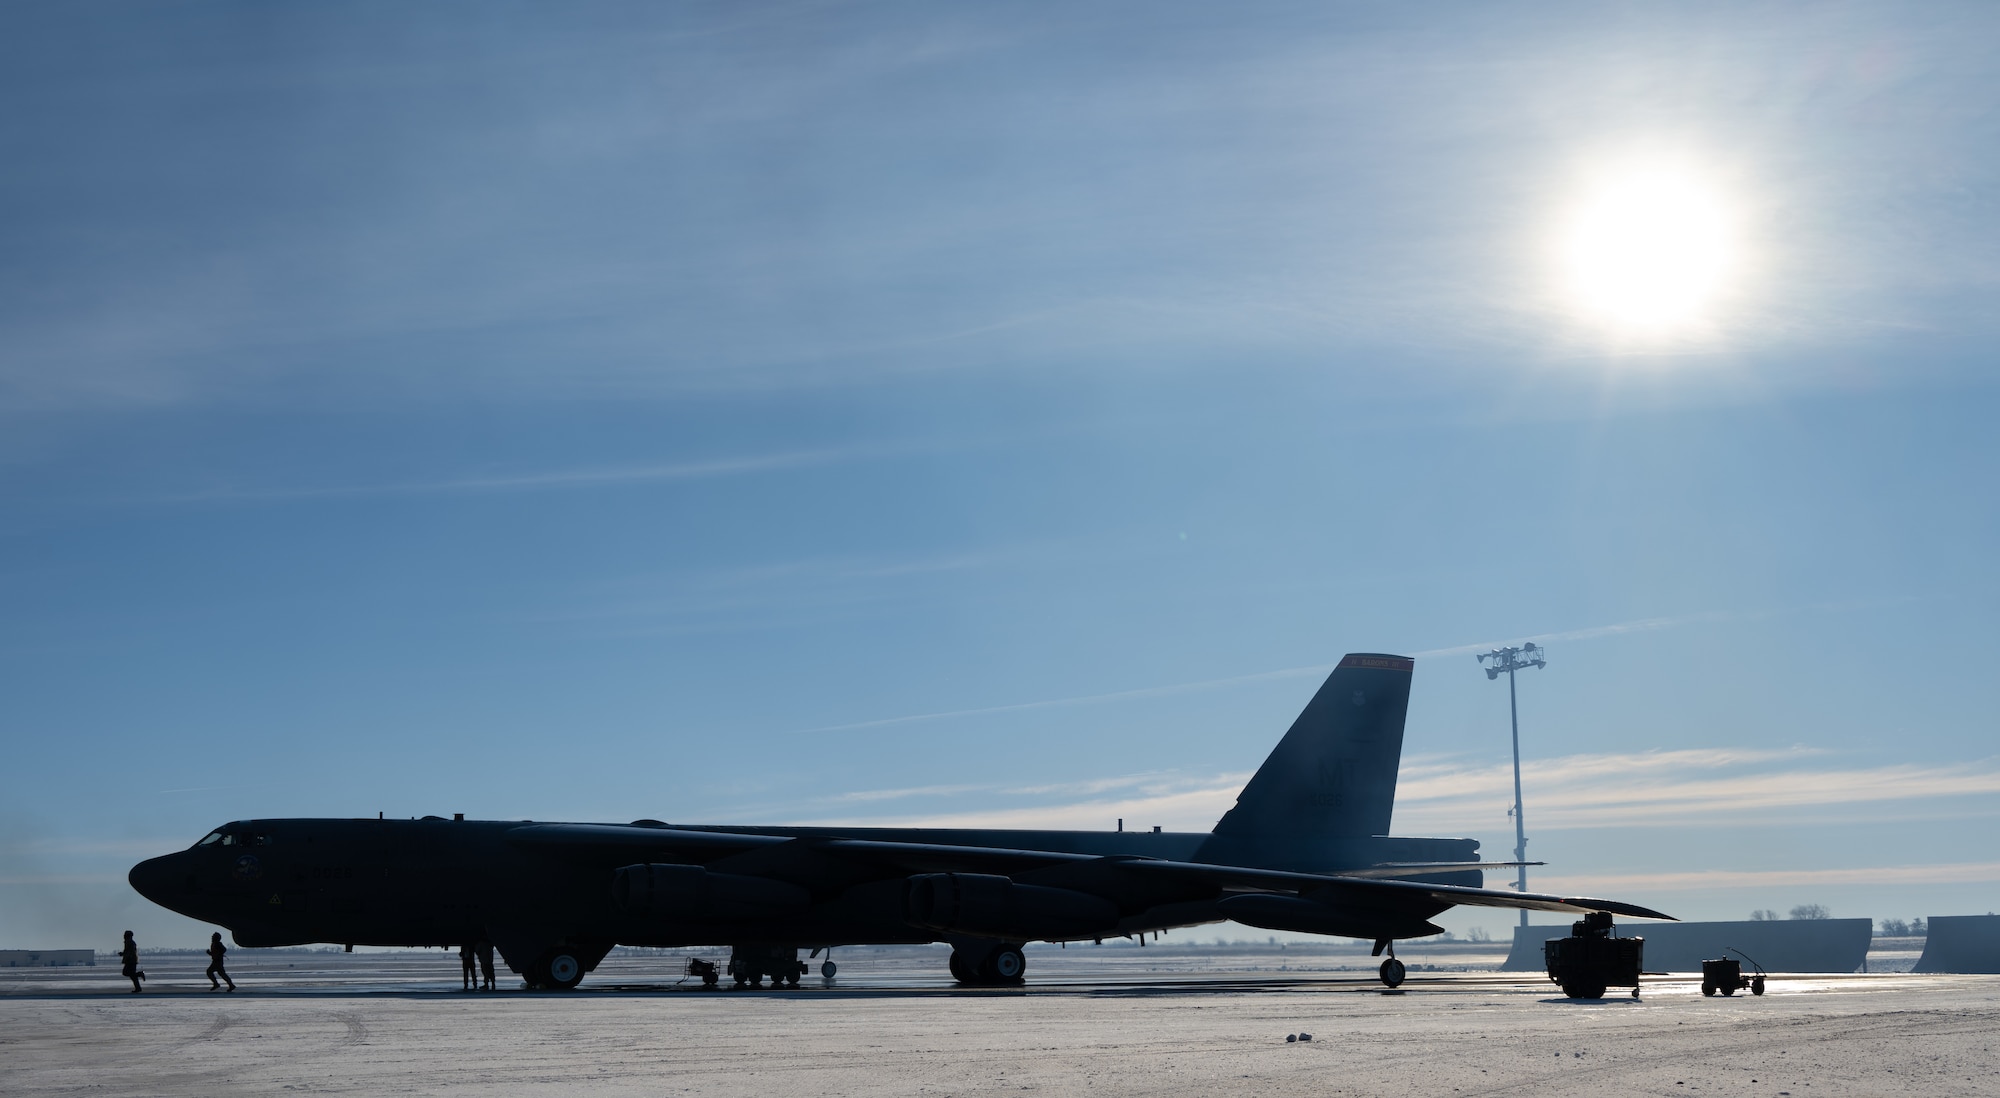 Airmen assigned to the 5th Aircraft Maintenance Squadron prepare a B-52H Stratofortress for SURGE Week on the flight line at Minot Air Force Base, North Dakota, Dec. 13, 2023. SURGE Week benefits Airmen by providing a training opportunity to learn and showcase mission strengths. (U.S. Air Force photo by Airman 1st Class Alyssa Bankston)